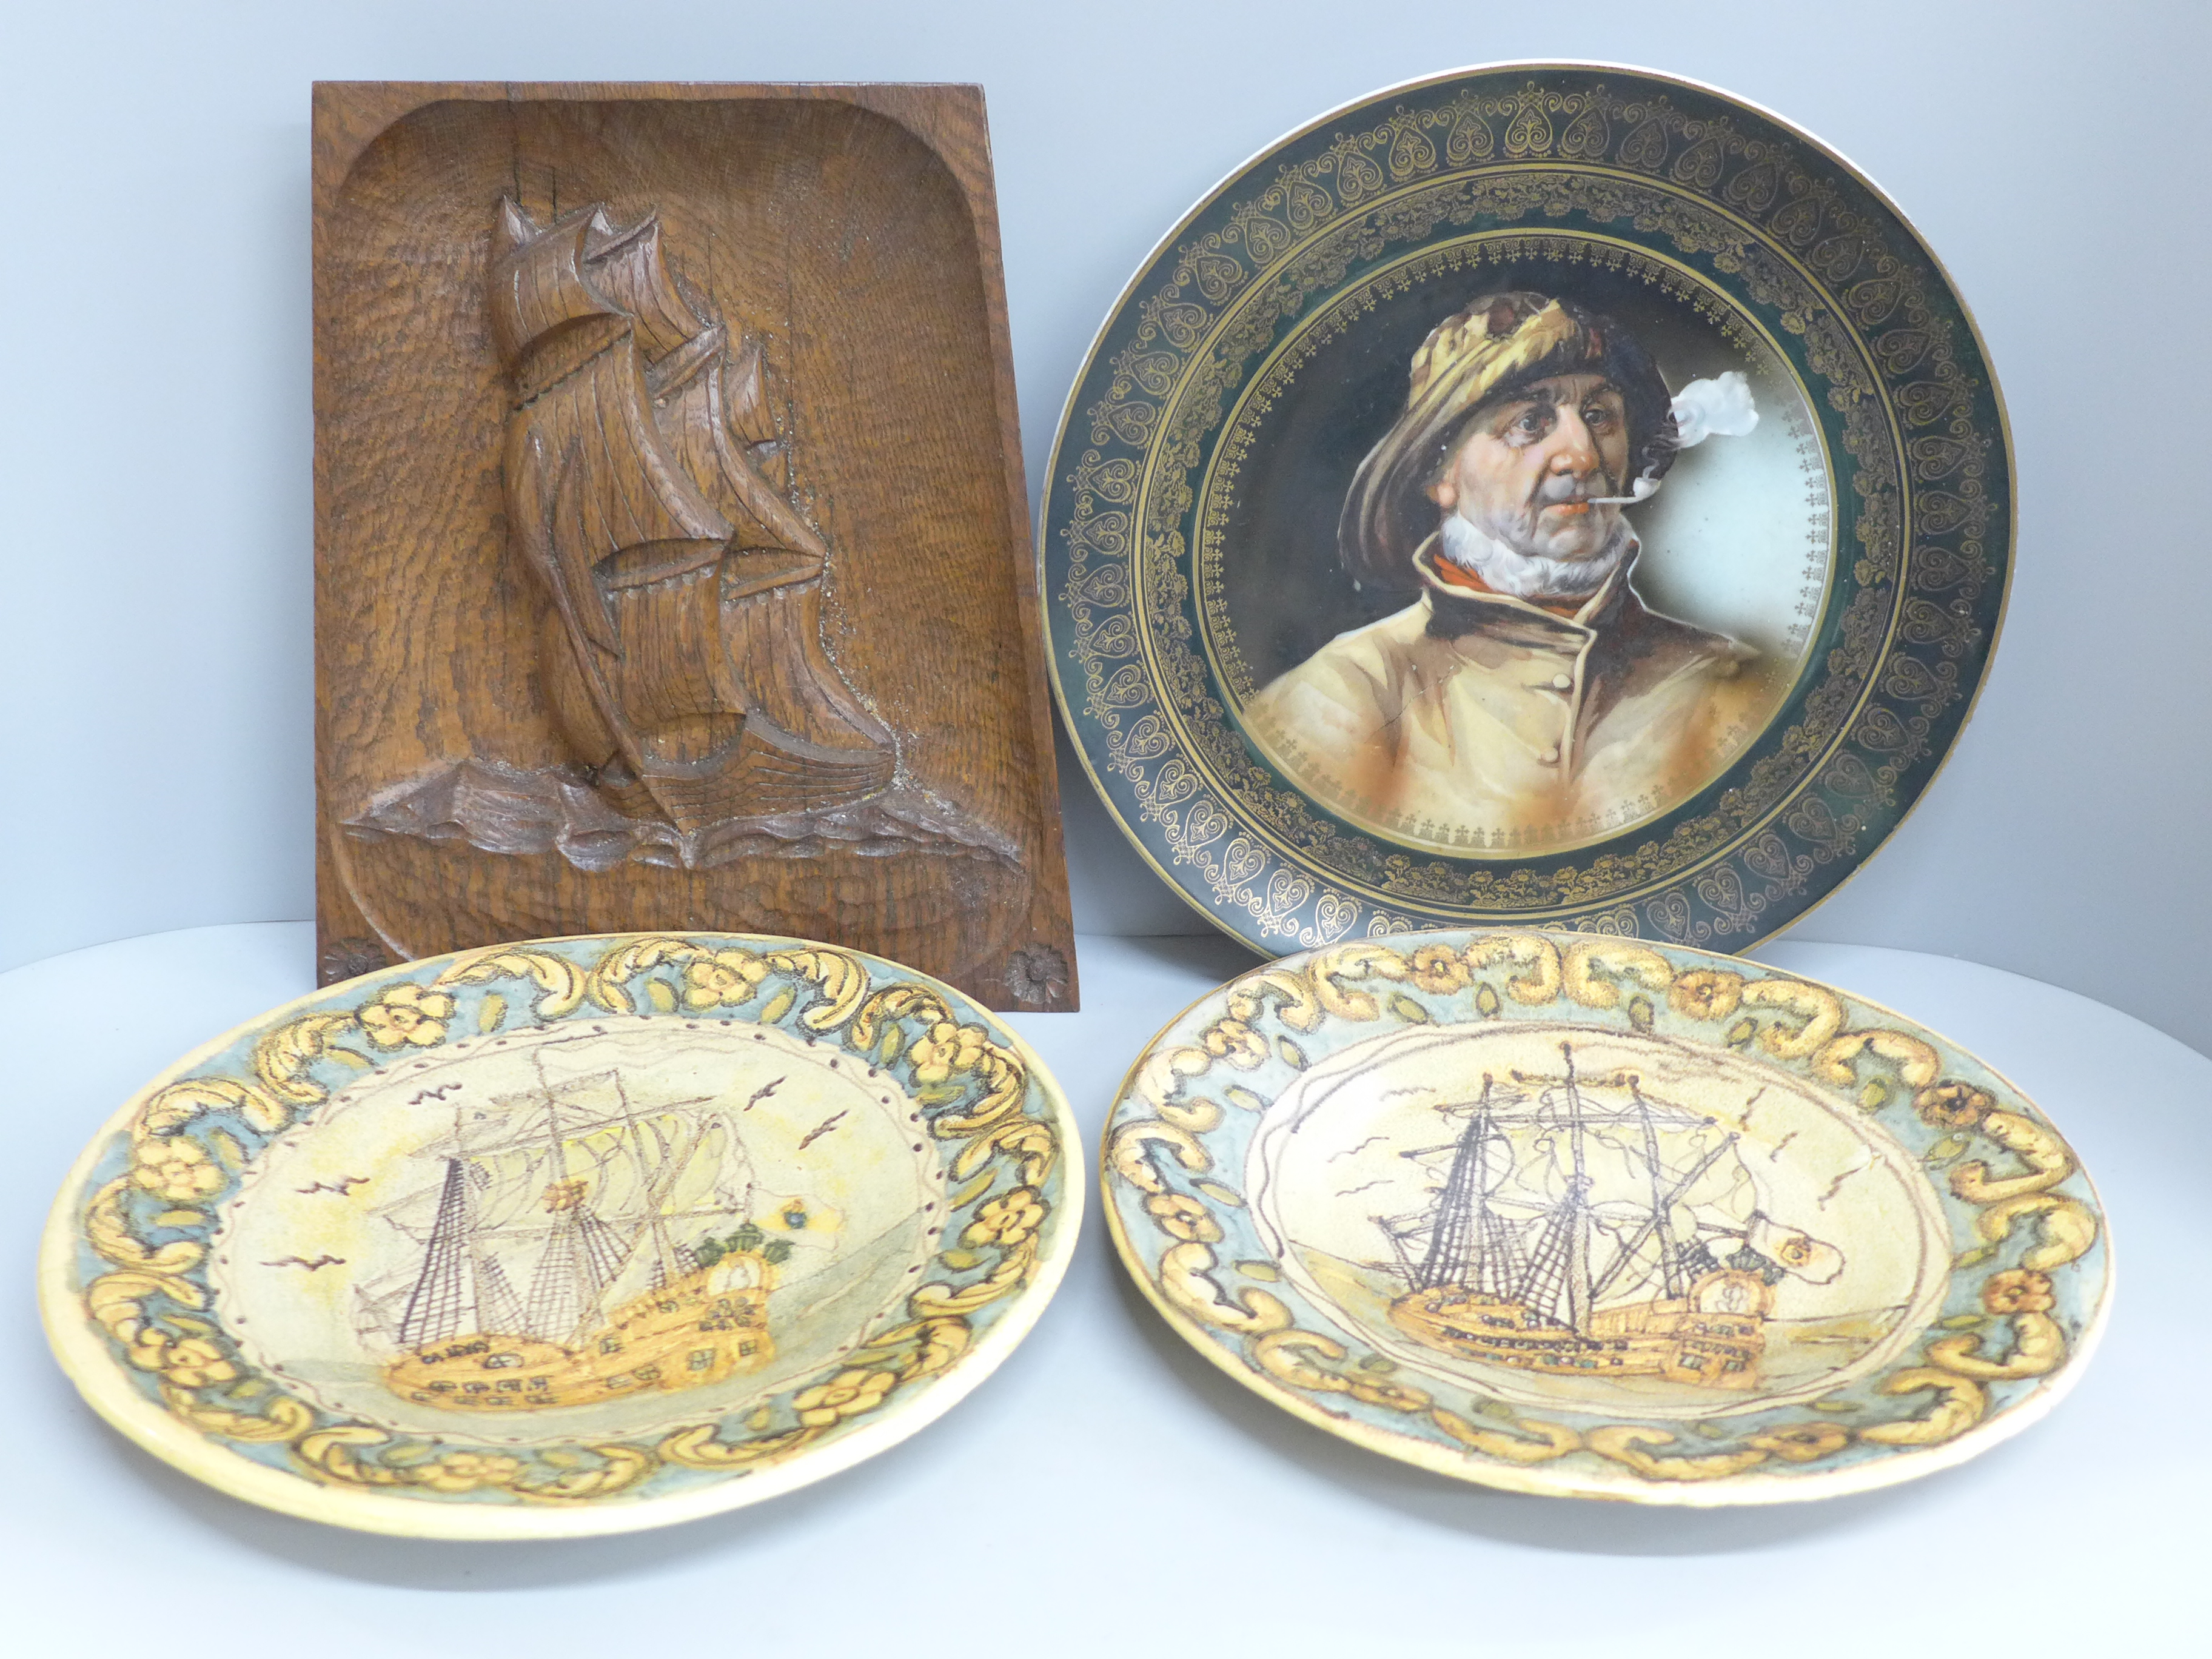 An Arts and Crafts style carved wooden plaque, two Portuguese plates and a charger with portrait